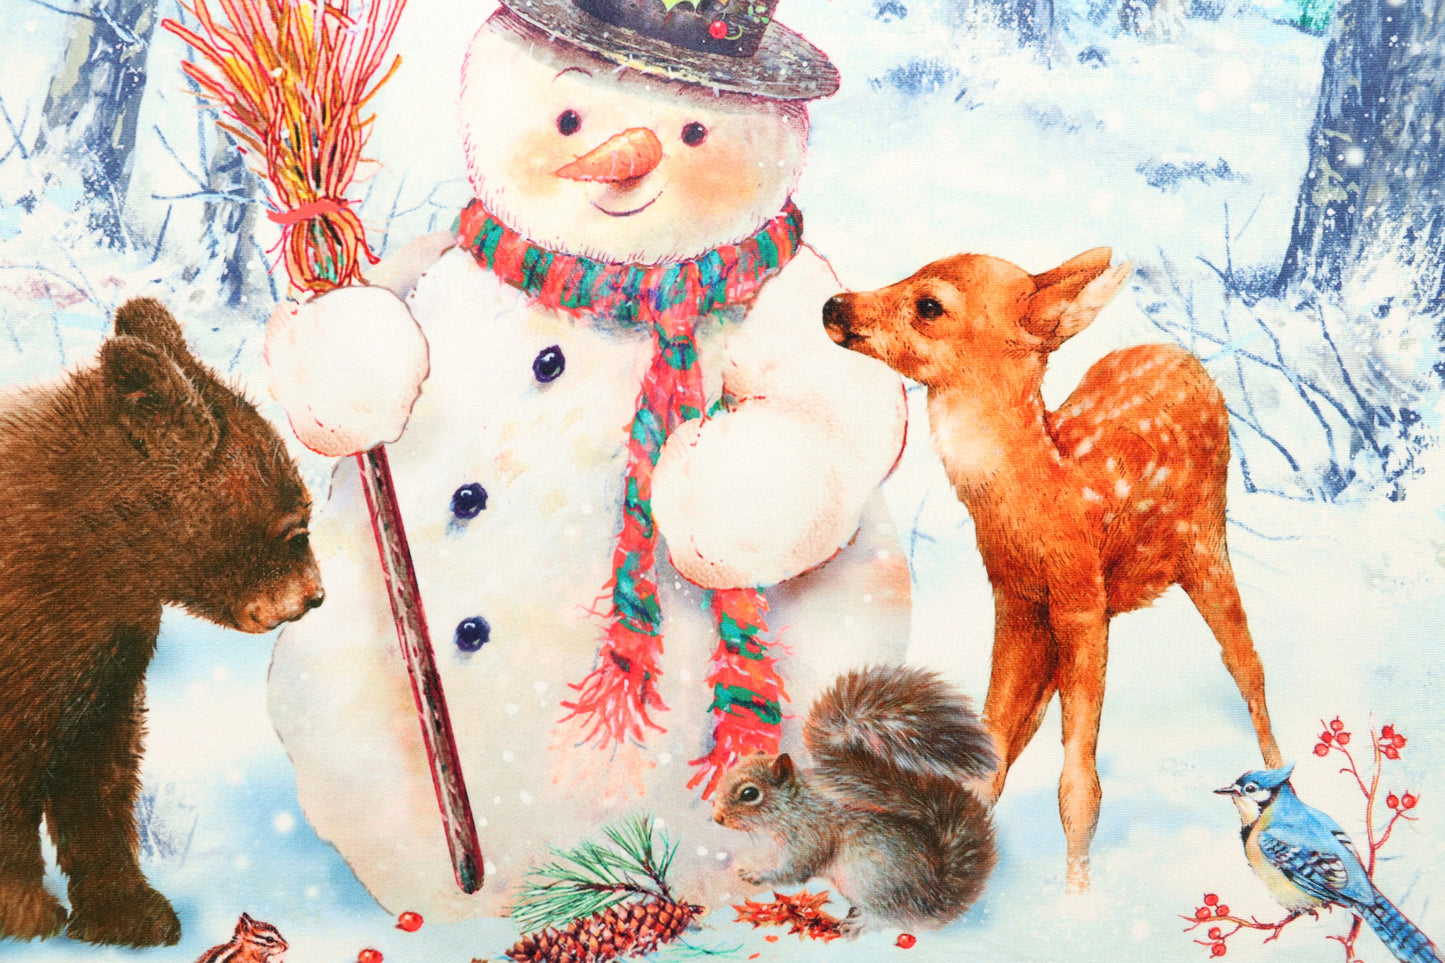 Snowman With Wildlife Olivia's Home Accent Washable Rug 22" x 32"